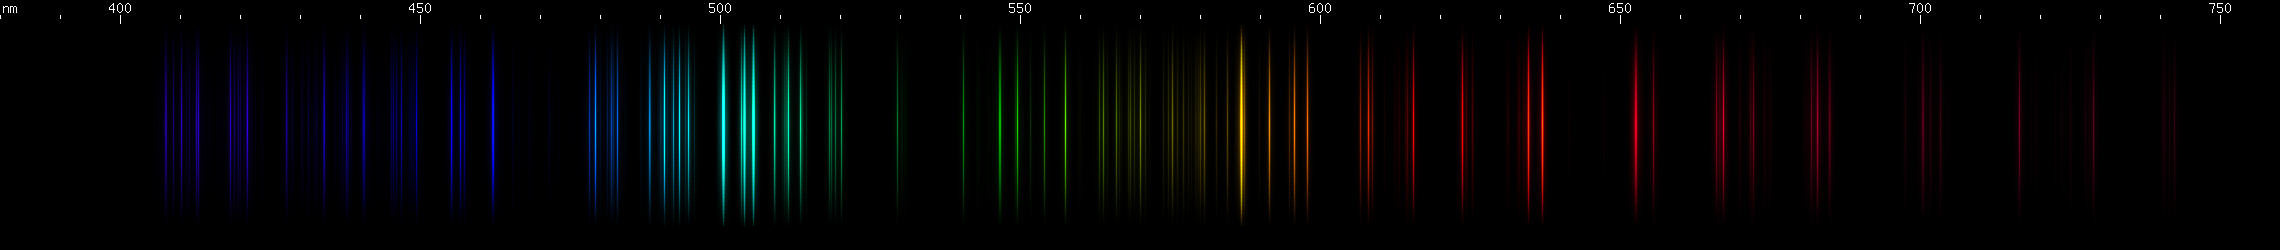 Spectral Lines of Silicon